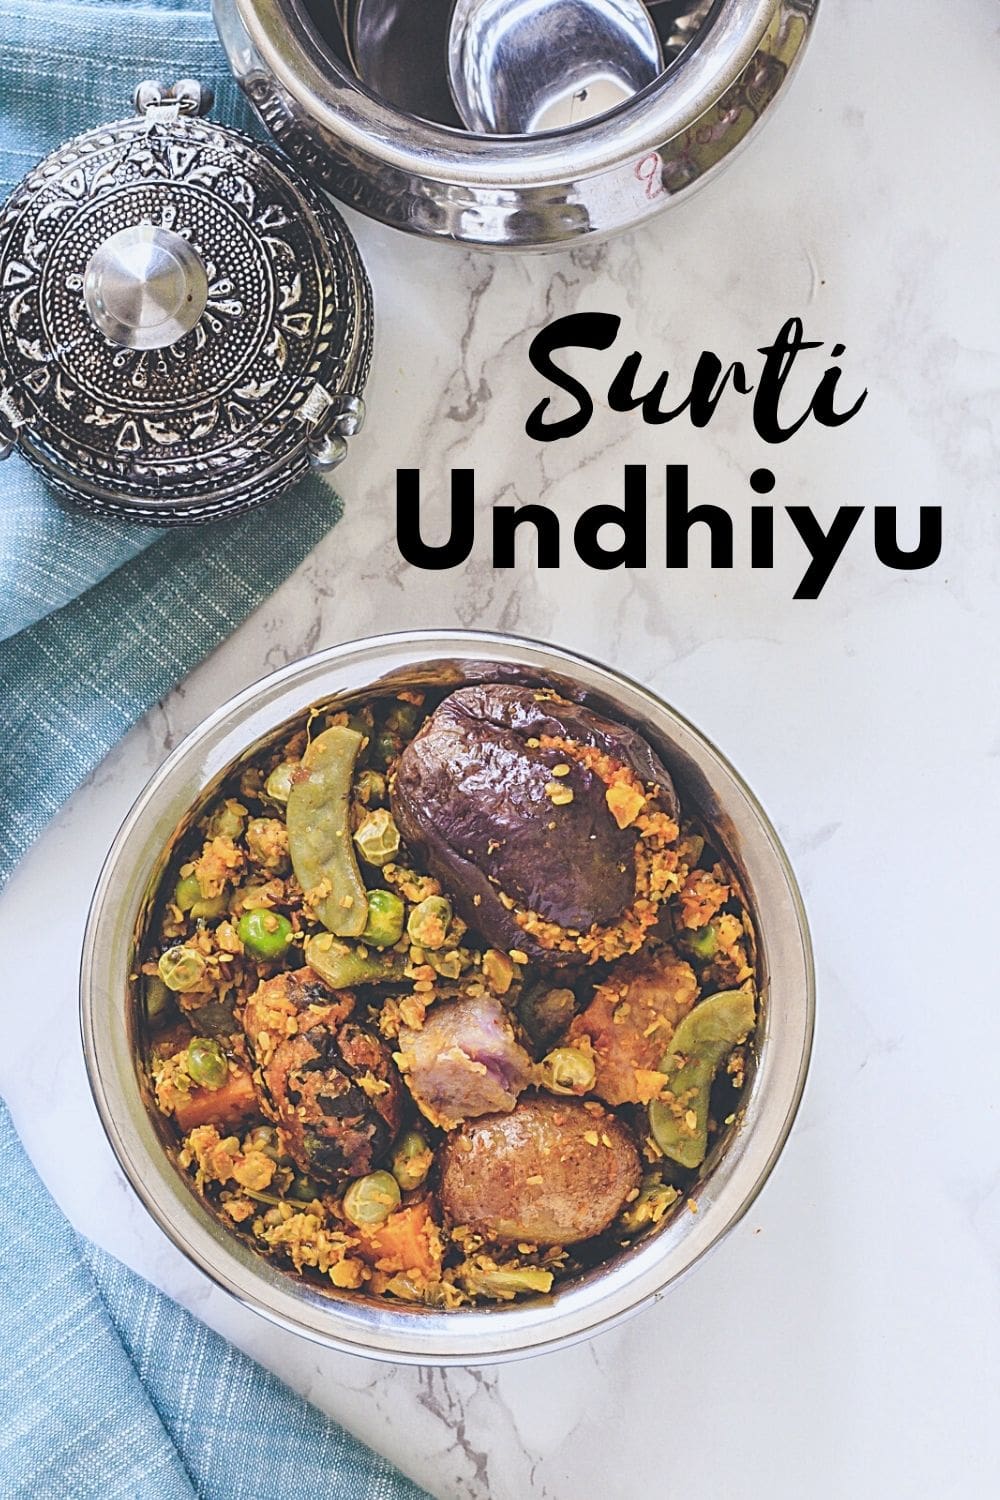 Undhiyu served in a steel bowl with text on the image for pinterest.